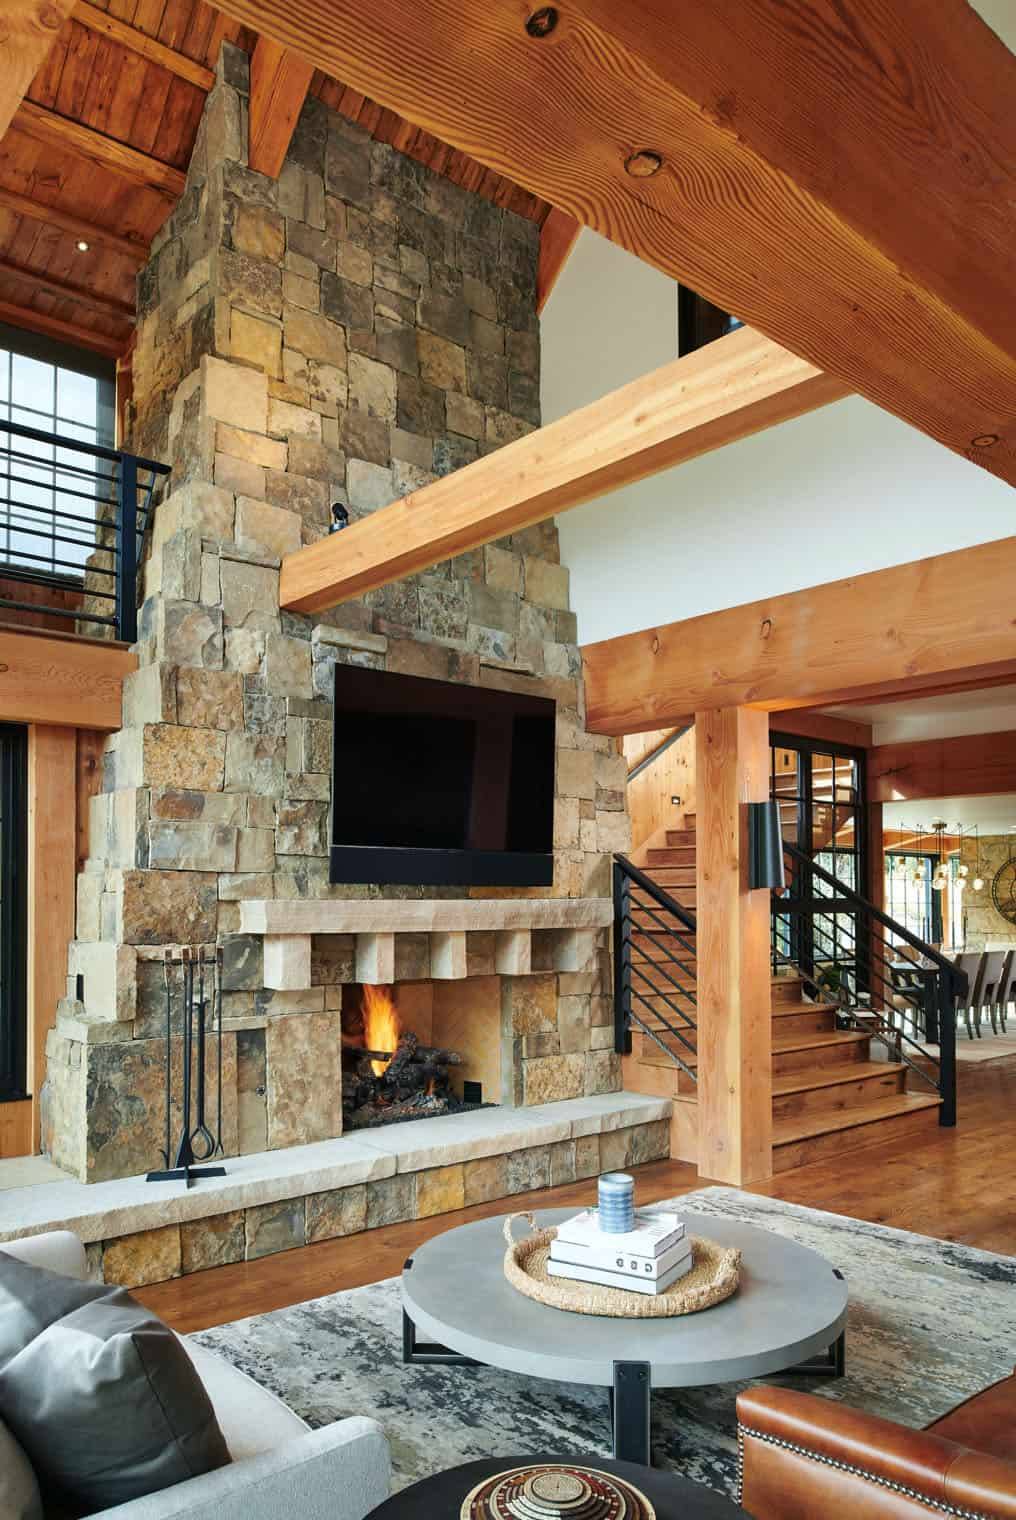 The living room shows off a cool two-story stone fireplace, and that is a centerpiece